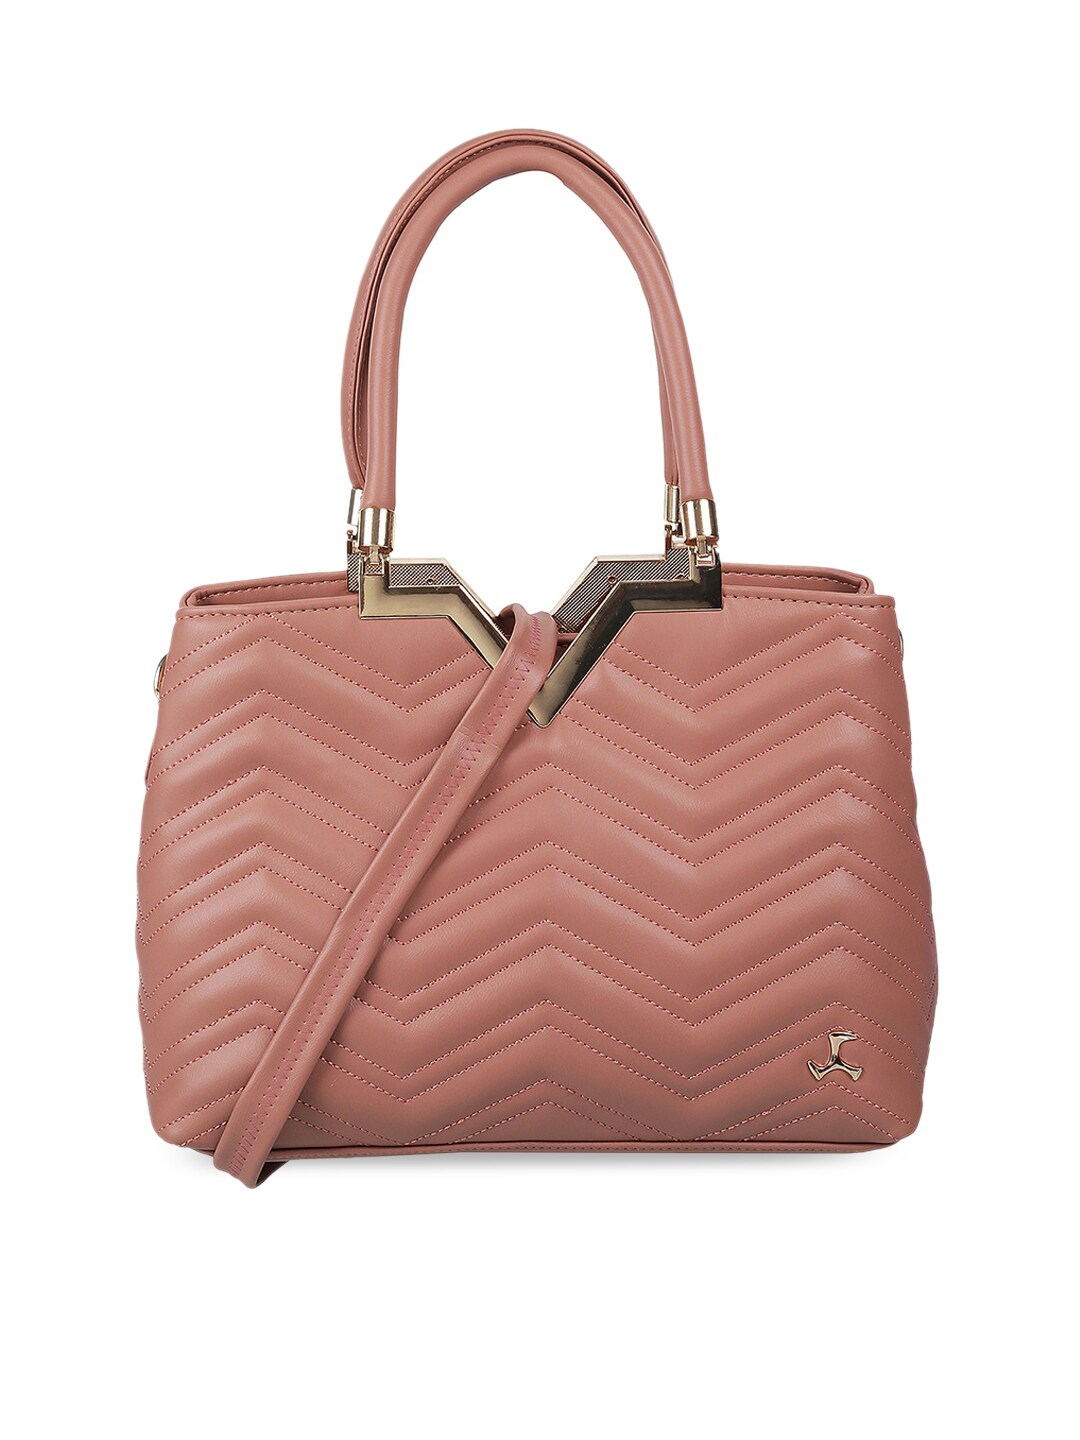 Mochi Peach-Coloured Textured Structured Handheld Bag with Detachable Sling Strap Price in India